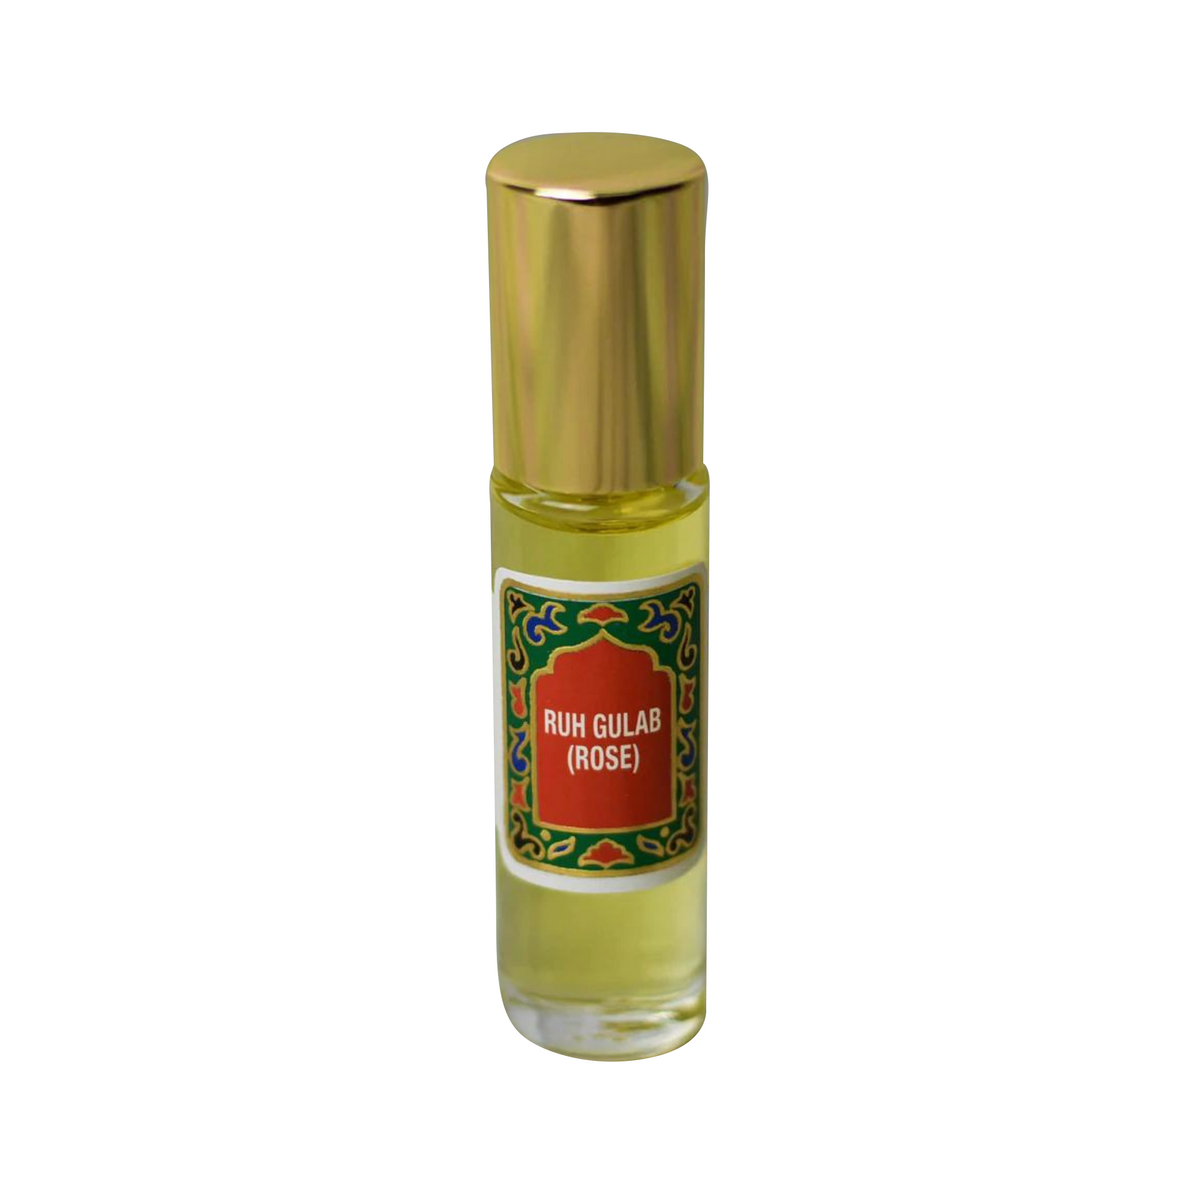 Primary image of Ruh Gulab (Rose) Fragrance Roll-On